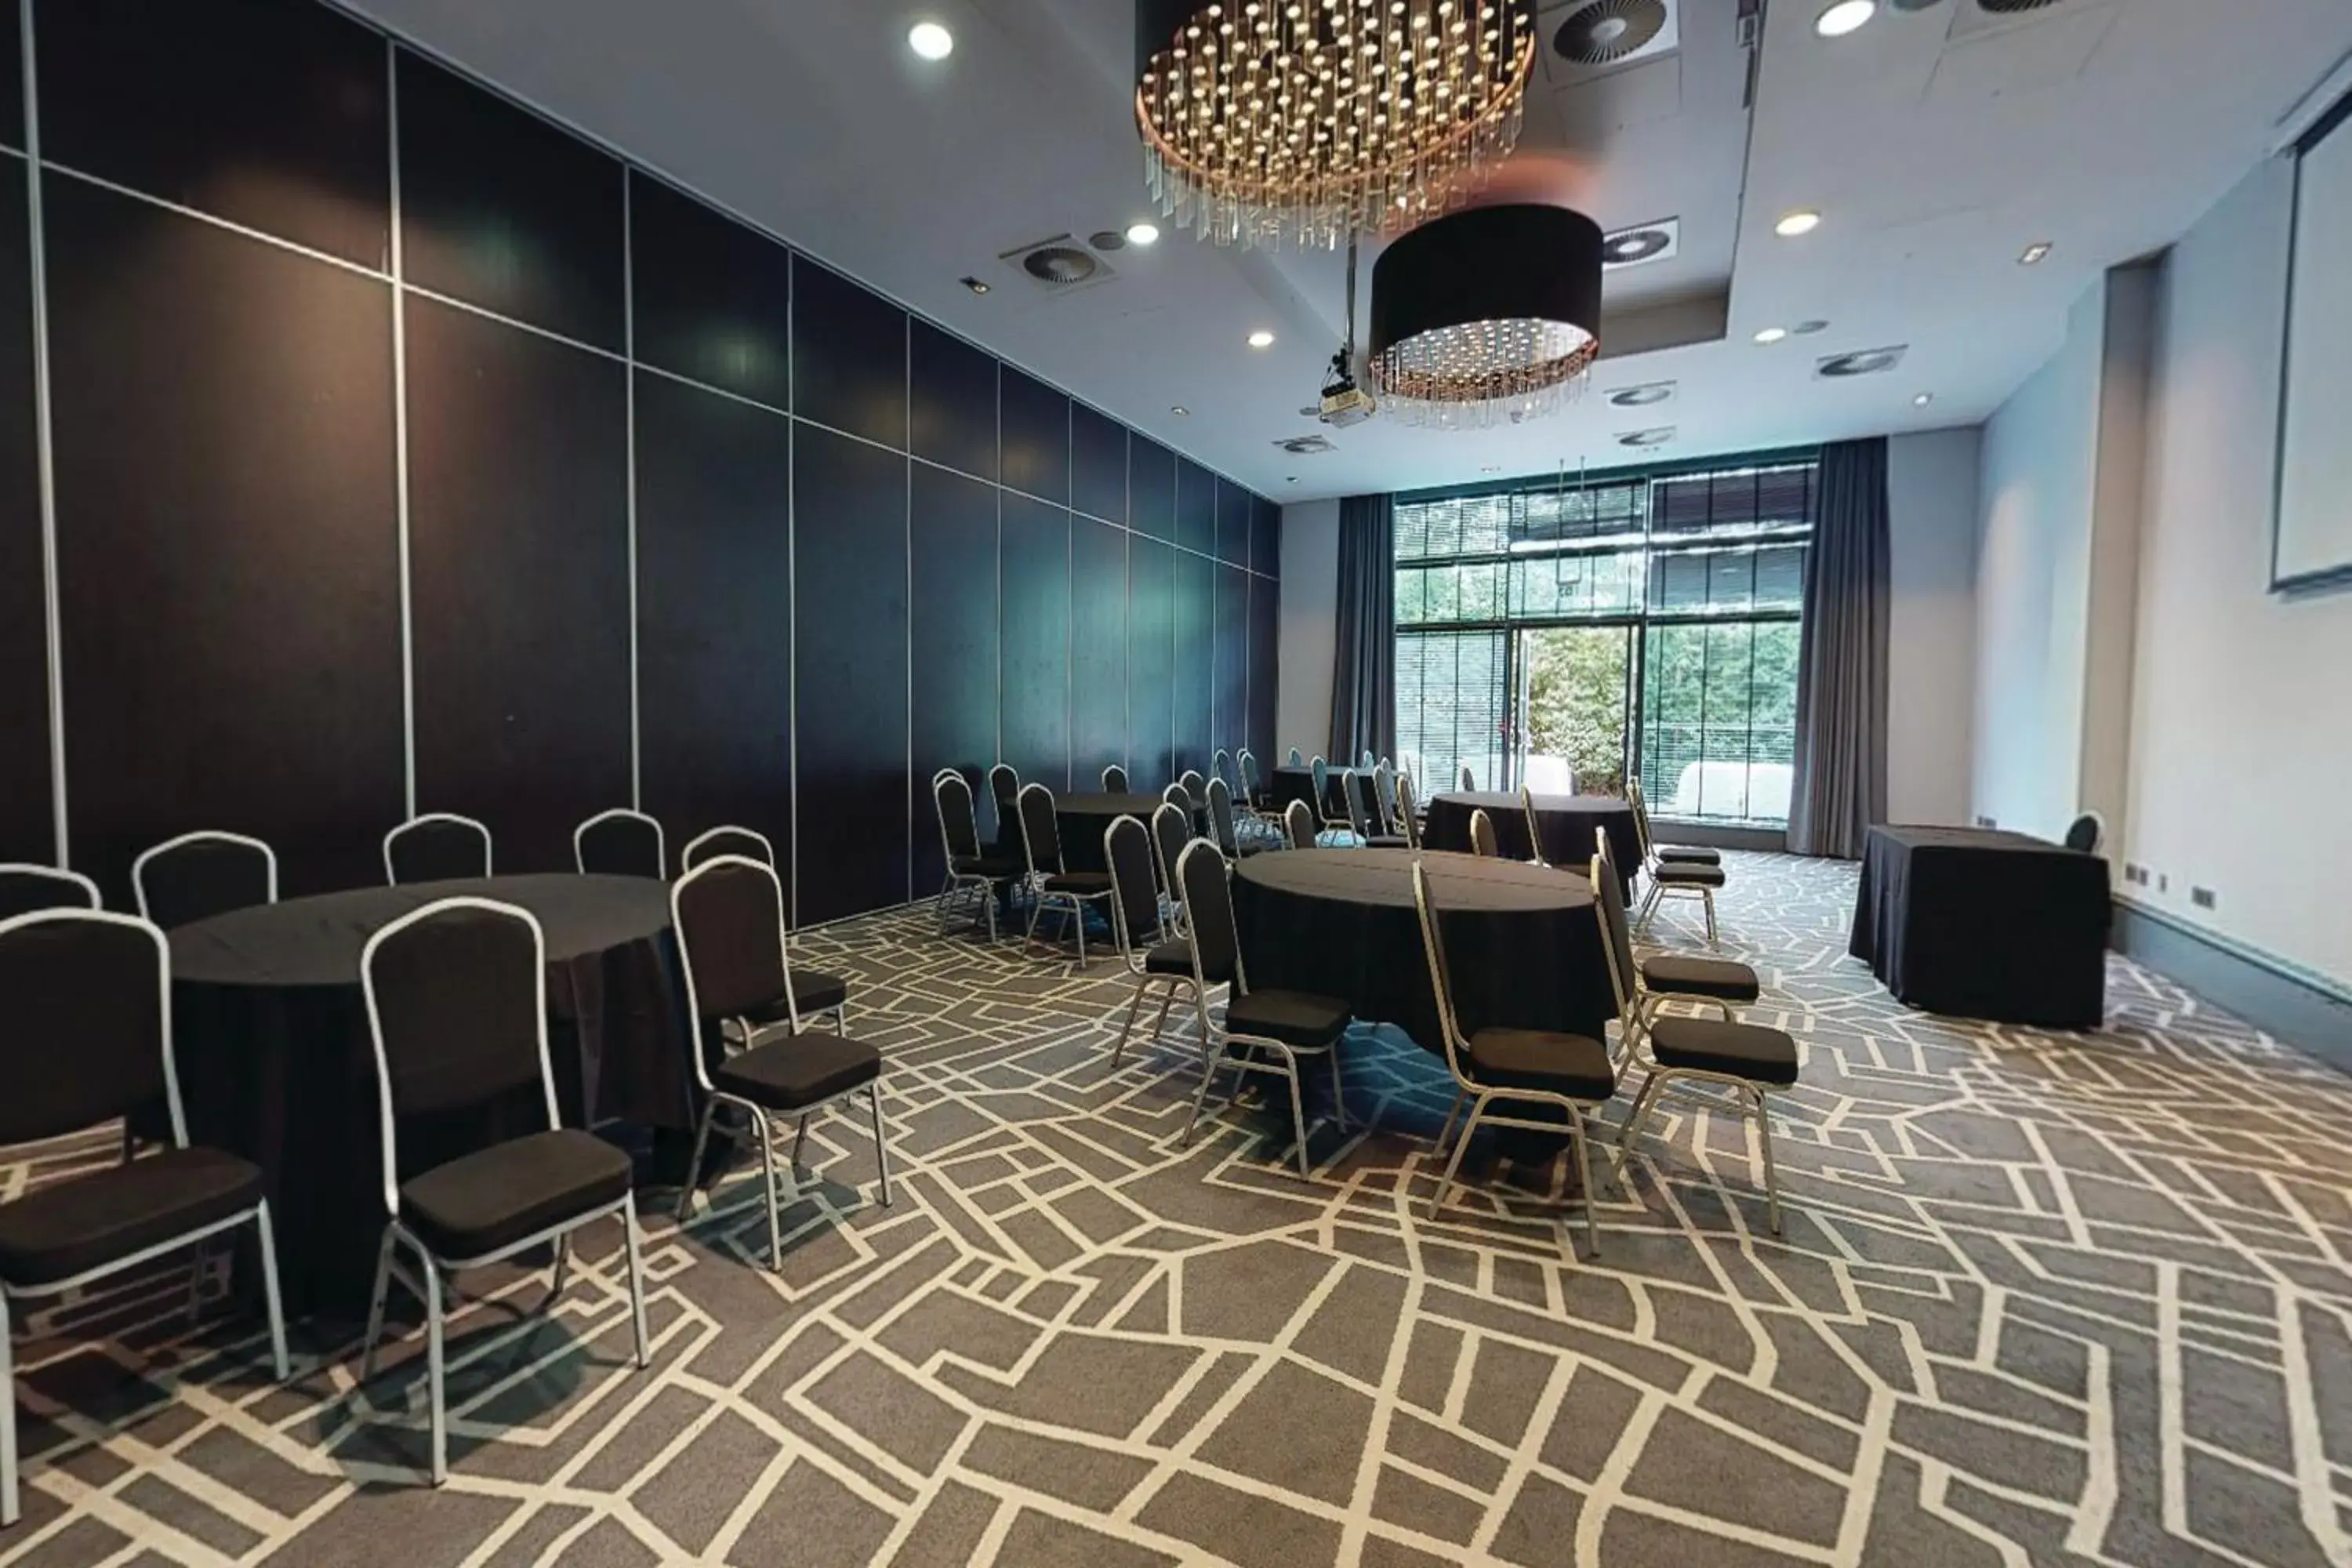 Meeting/conference room in Village Hotel Solihull